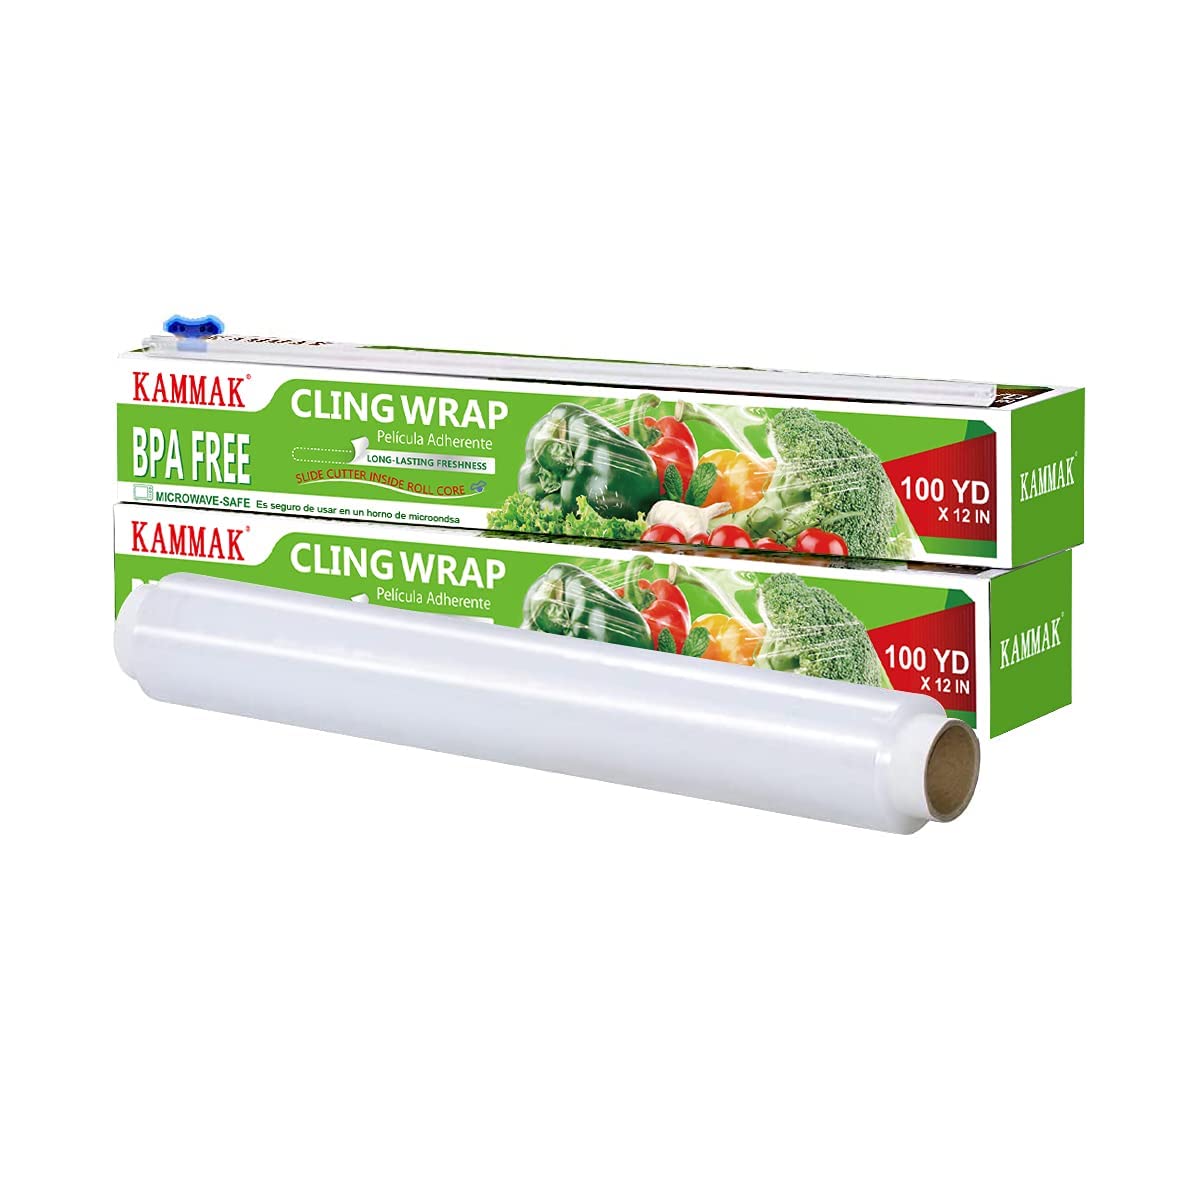 Plastic Wrap with Slide Cutter 12 Inch X 300 Square Foot Roll KAMMAK Cling  Wrap for Food BPA-Free Microwave-Safe Kitchens Quick Cut Food Service Film  (Pack of 2) 300 Sq Ft (Pack of 2)